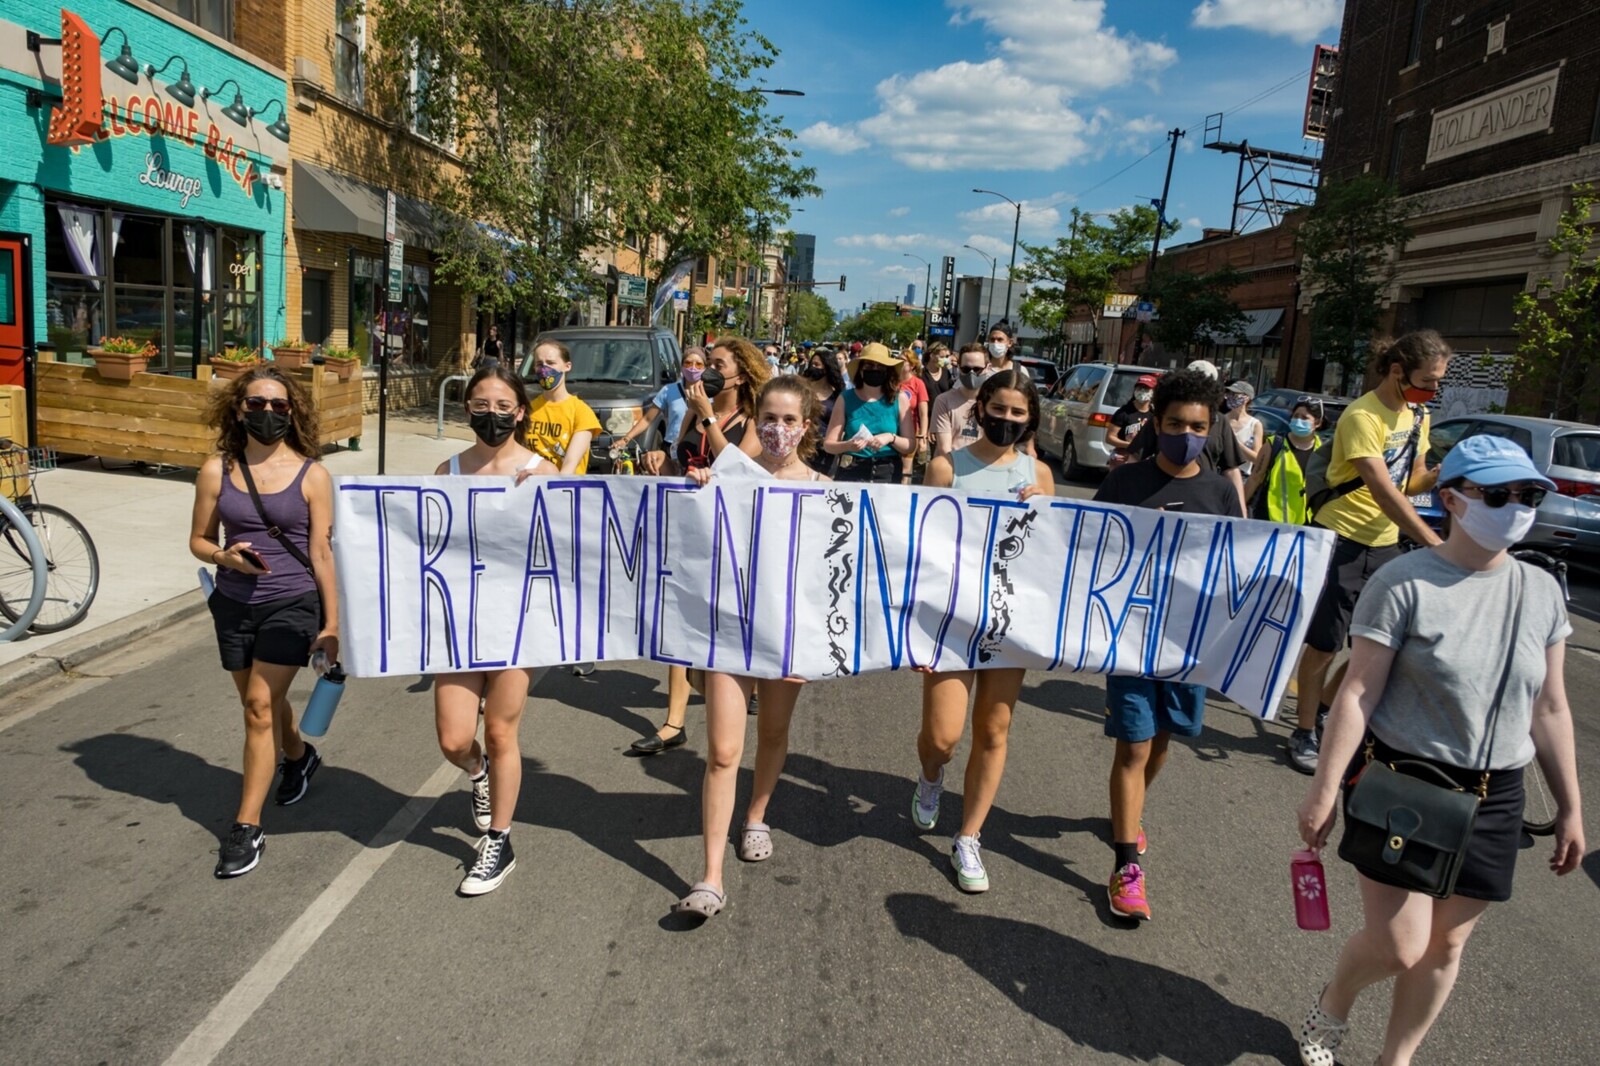 people marching down the street holding a banner that says treatment not trauma